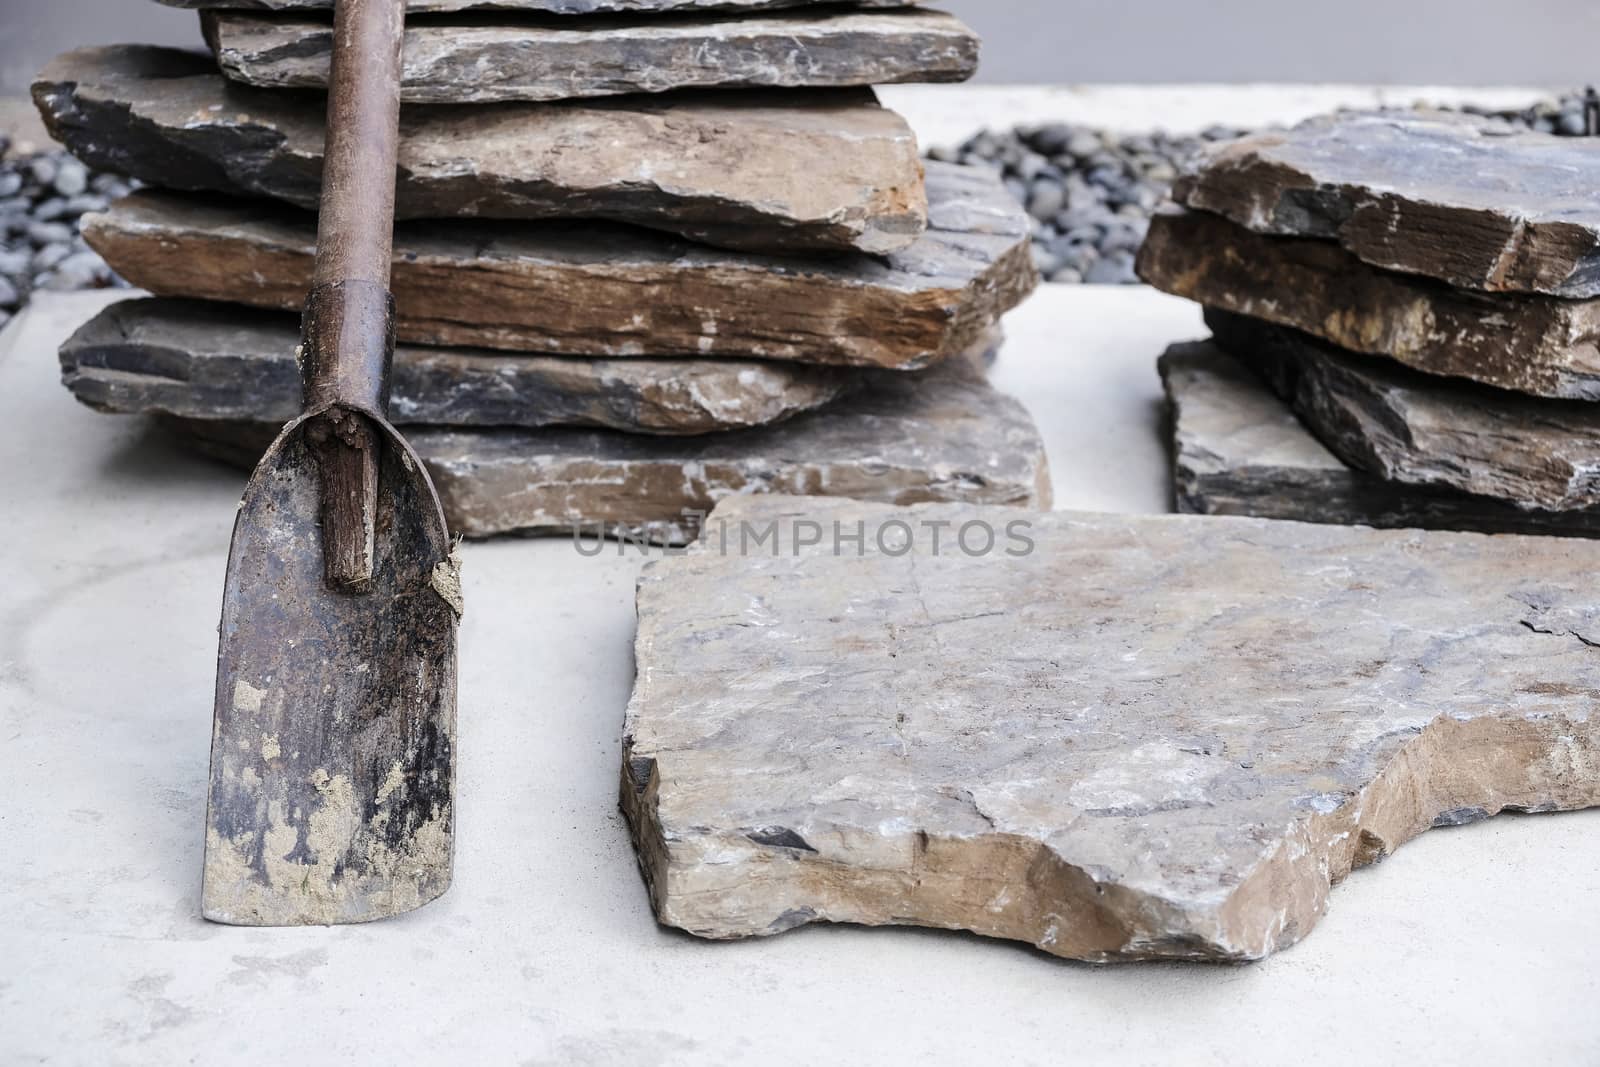 Shovel and stone cladding for garden decoration by Myimagine